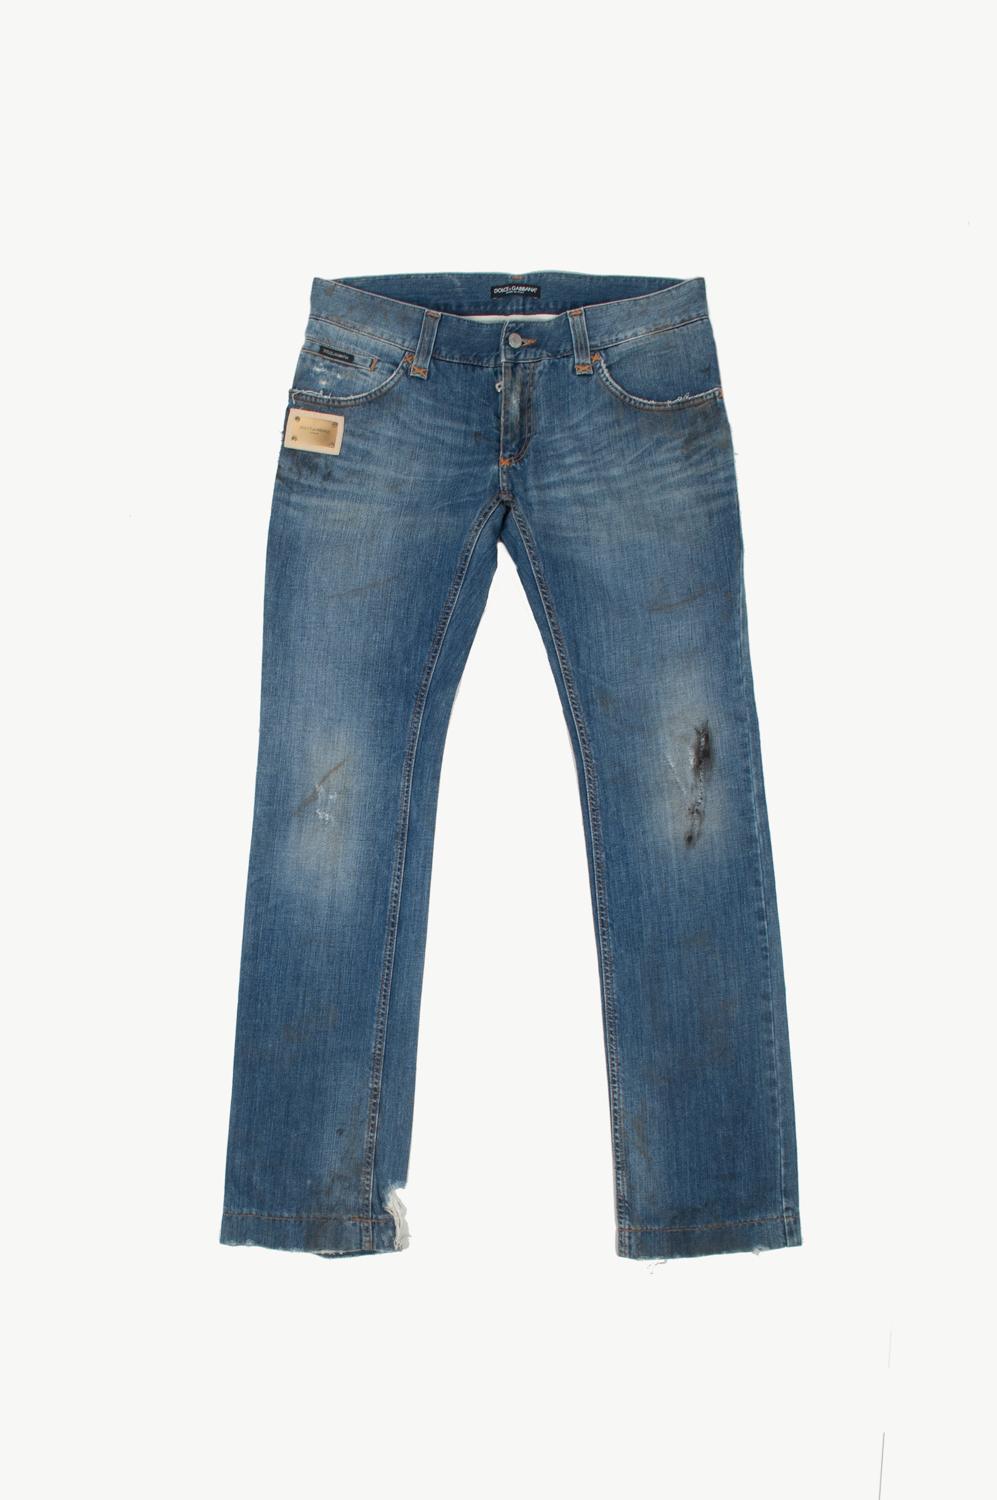 Dolce&Gabbana Sex Men Distressed Dirty Ripped Design Jeans Size ITA 50  For Sale 2